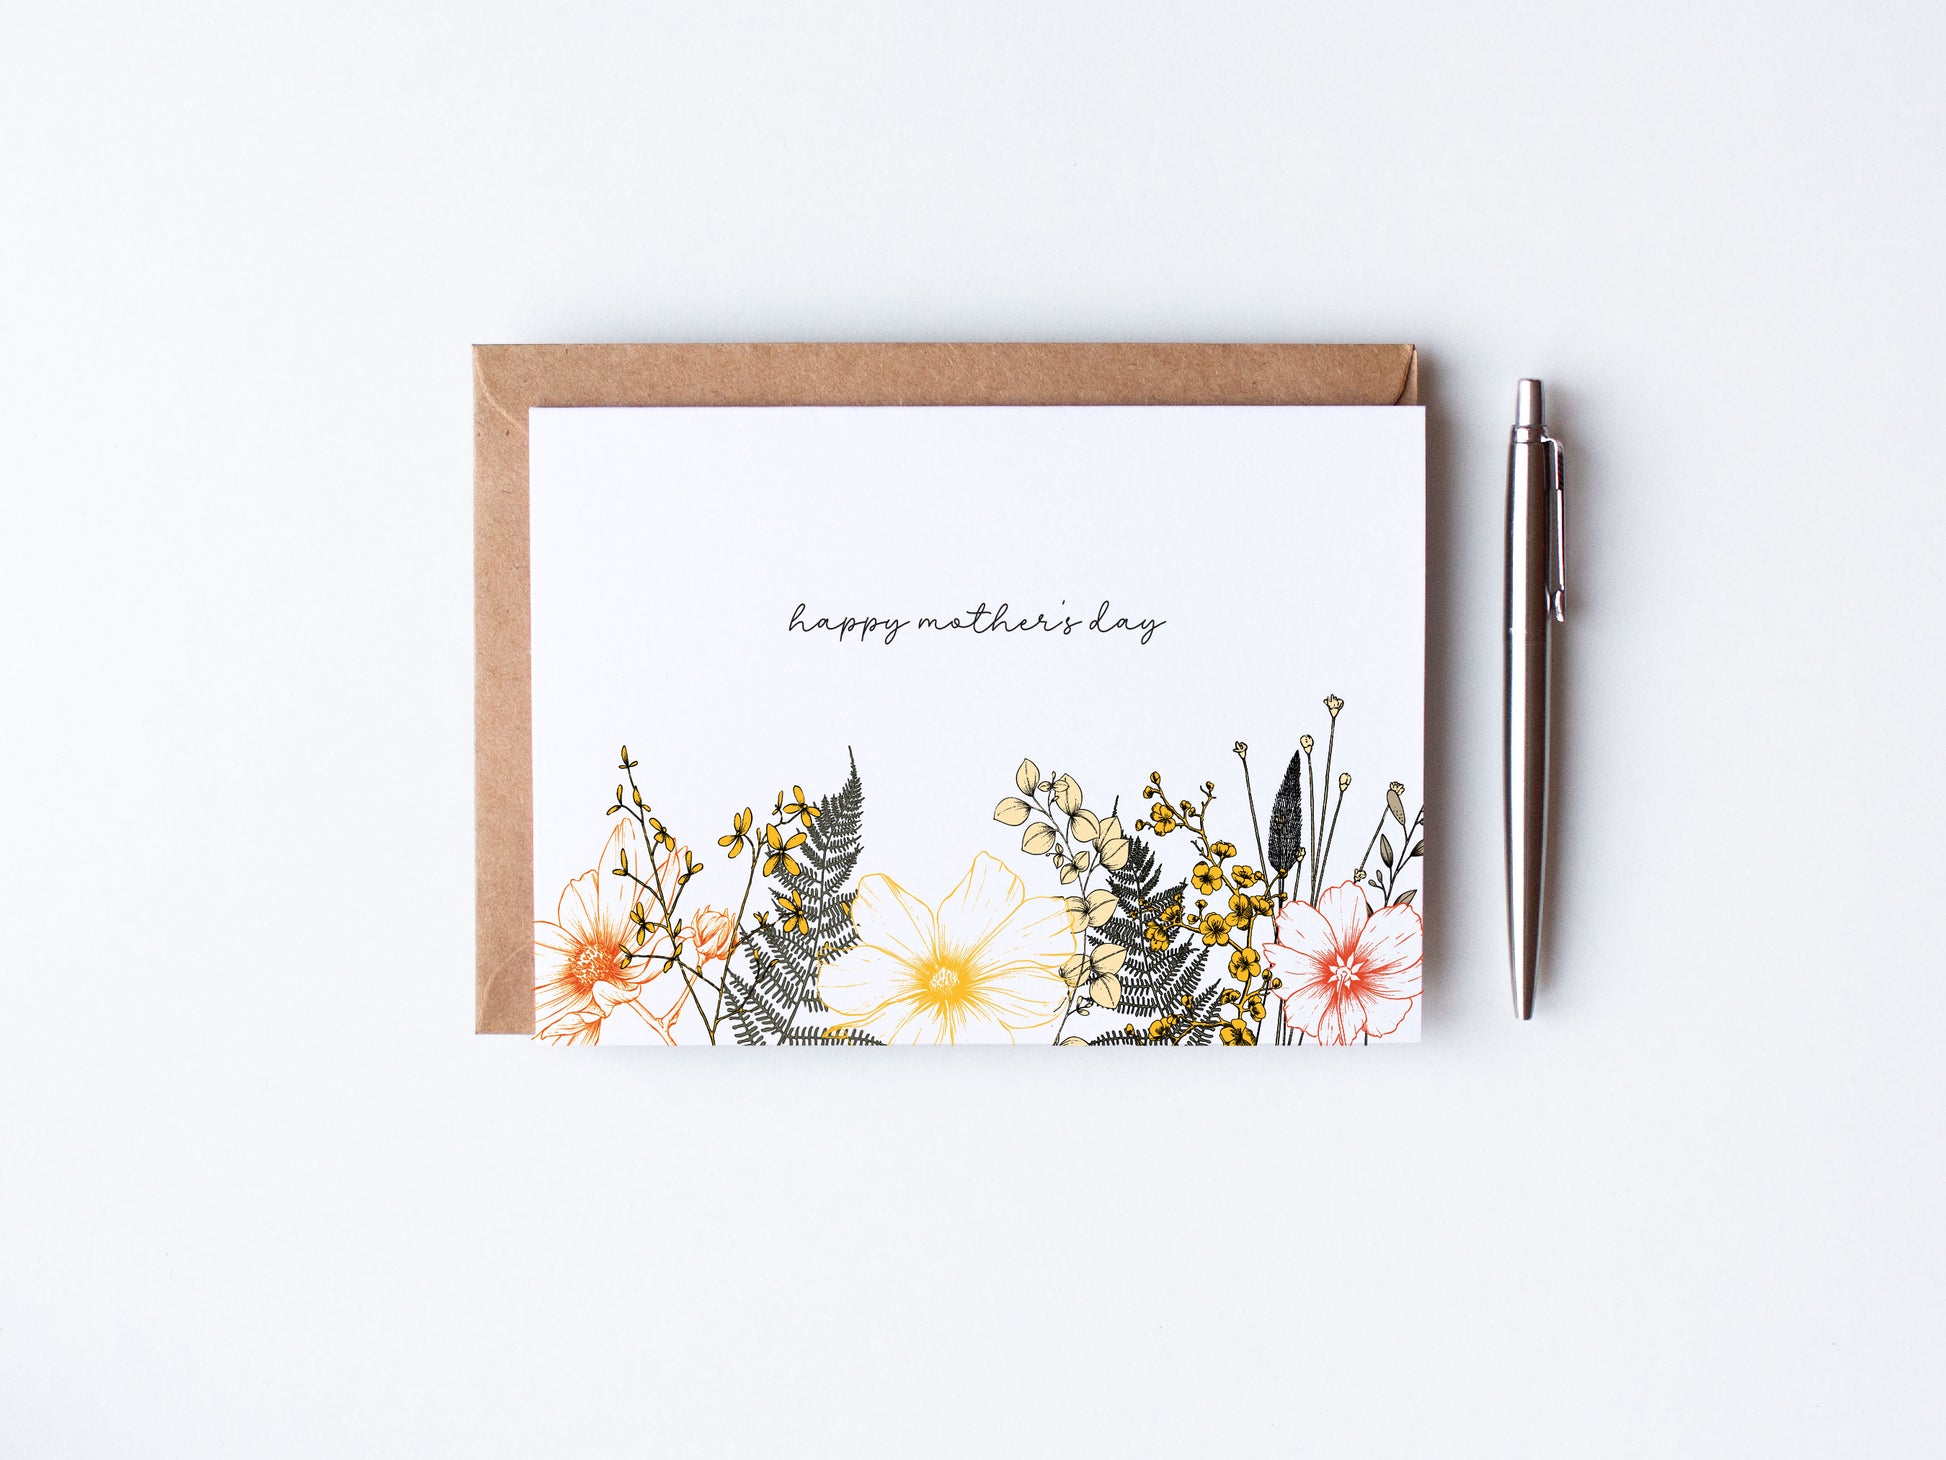 Floral Moher's Day Card - Orange and yellow bold florals